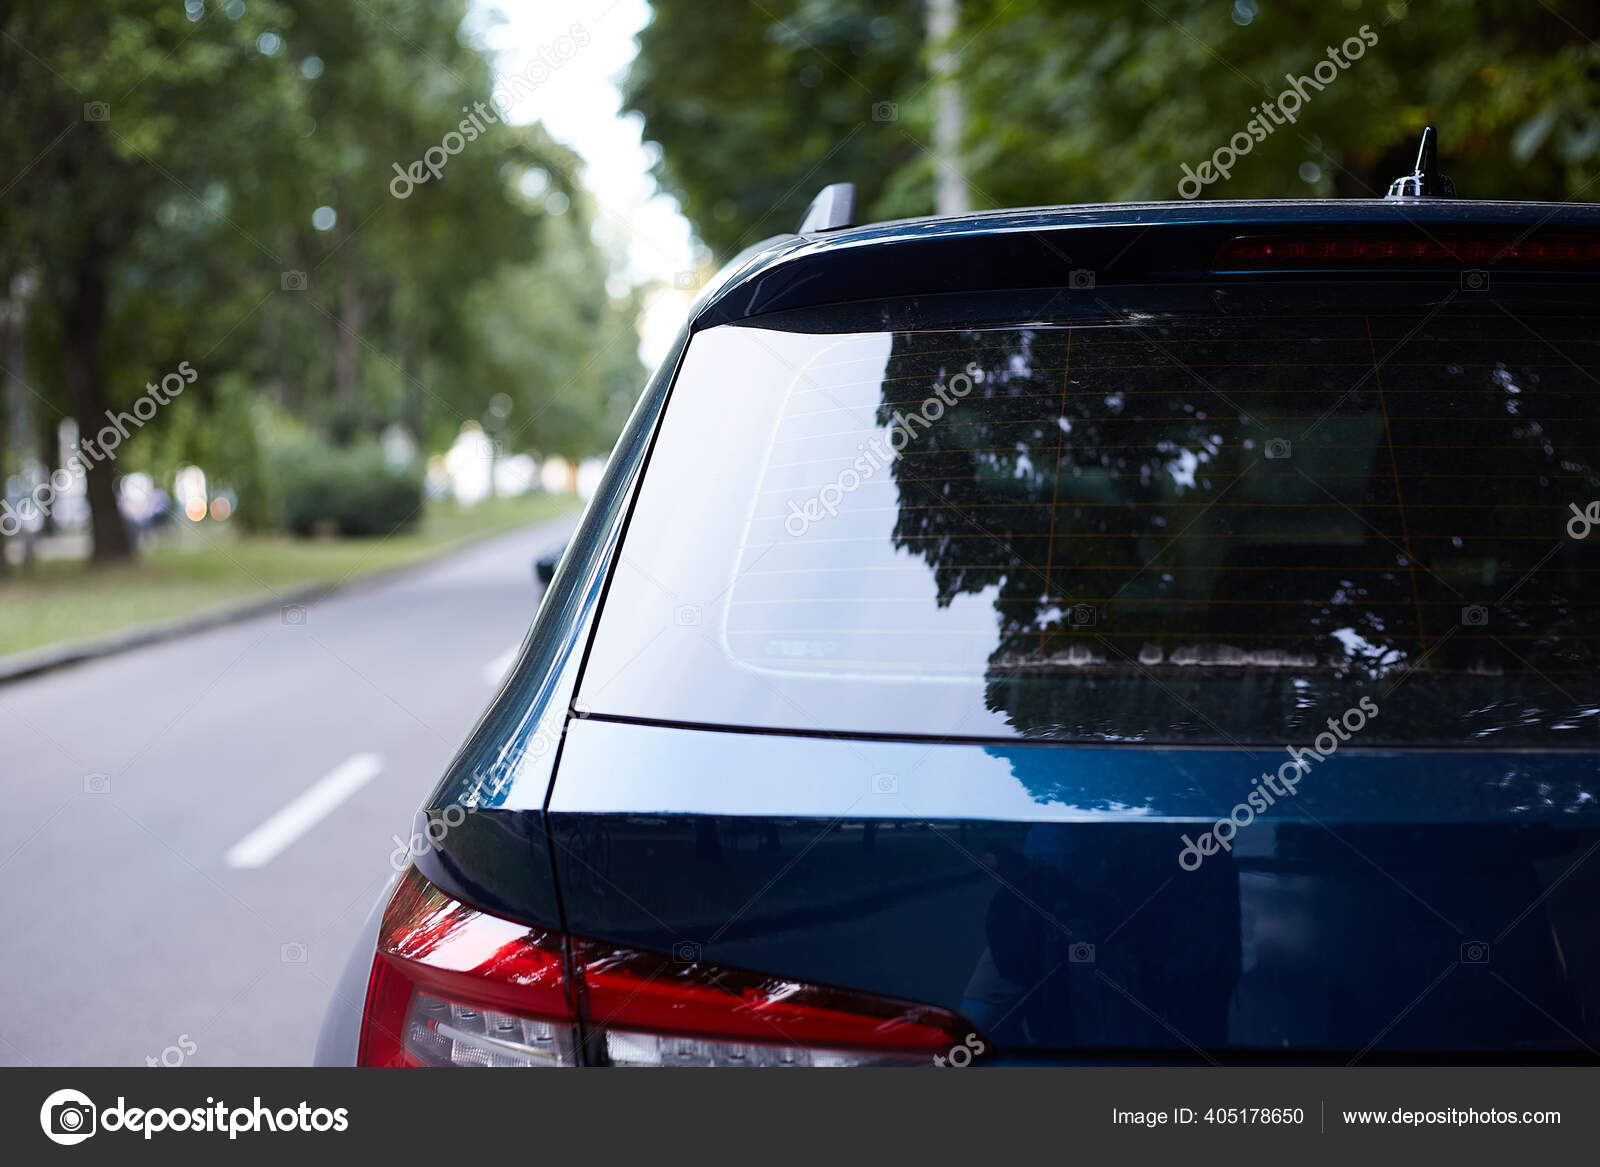 Back Window Of Blue Car Parked On The Street In Summer Sunny Day Rear View Mock Up For Sticker Or Decals Stock Photo By C Foxalexey 405178650